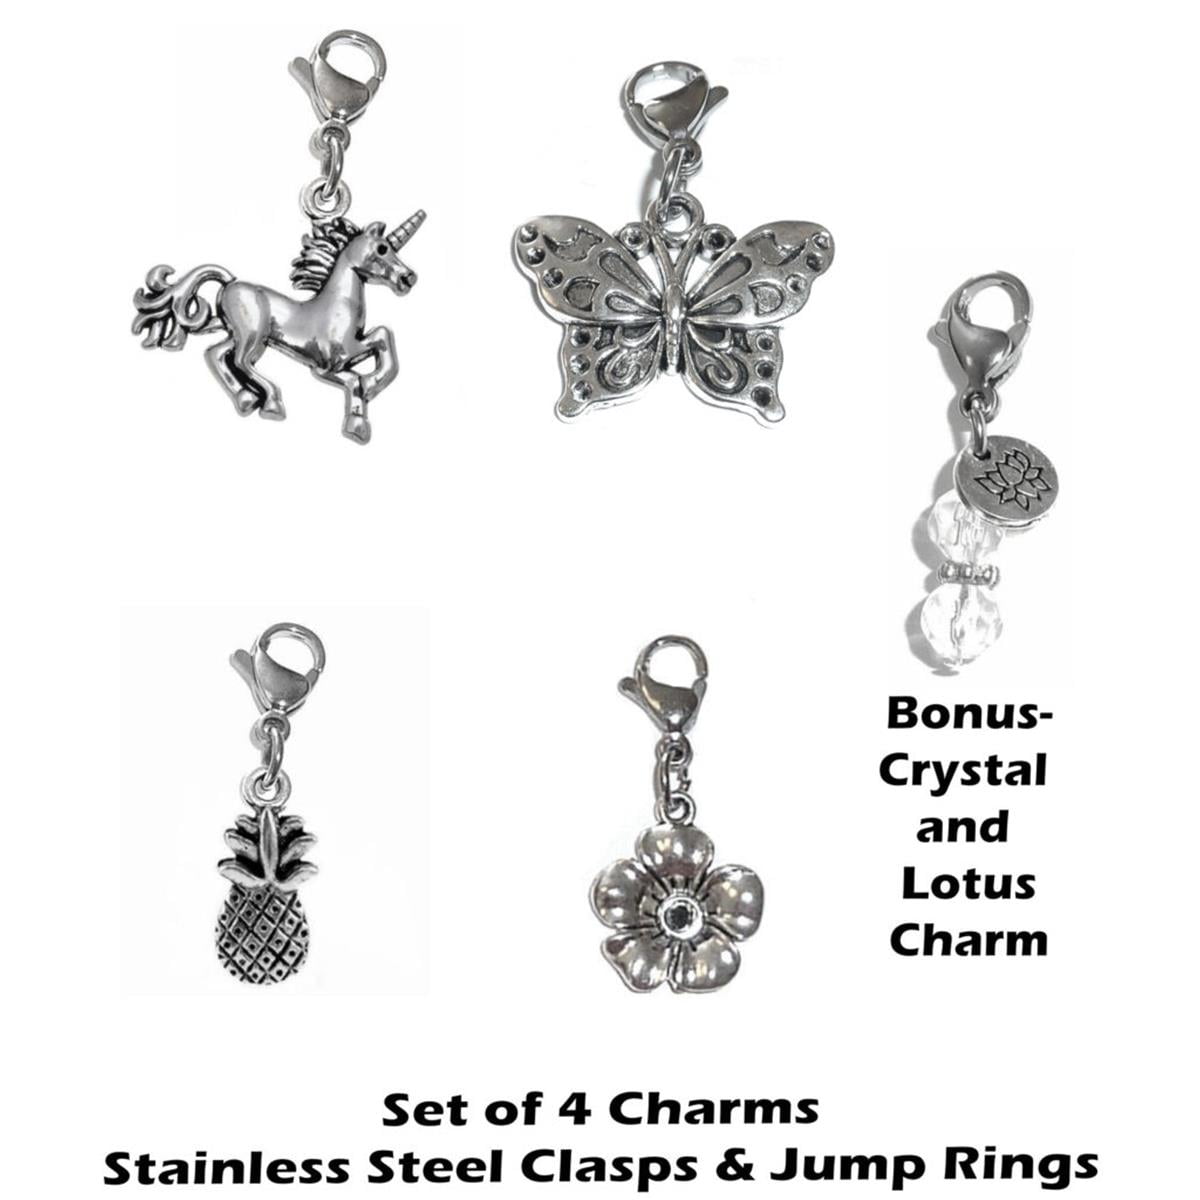 Charms Clip On - Perfect For Bracelet Or Necklace, Zipper Pull Charm, Bag  Or Purse Charm Easy To Use DIY Charms - 4 Pack Whimsical Mix Clip On Charms  